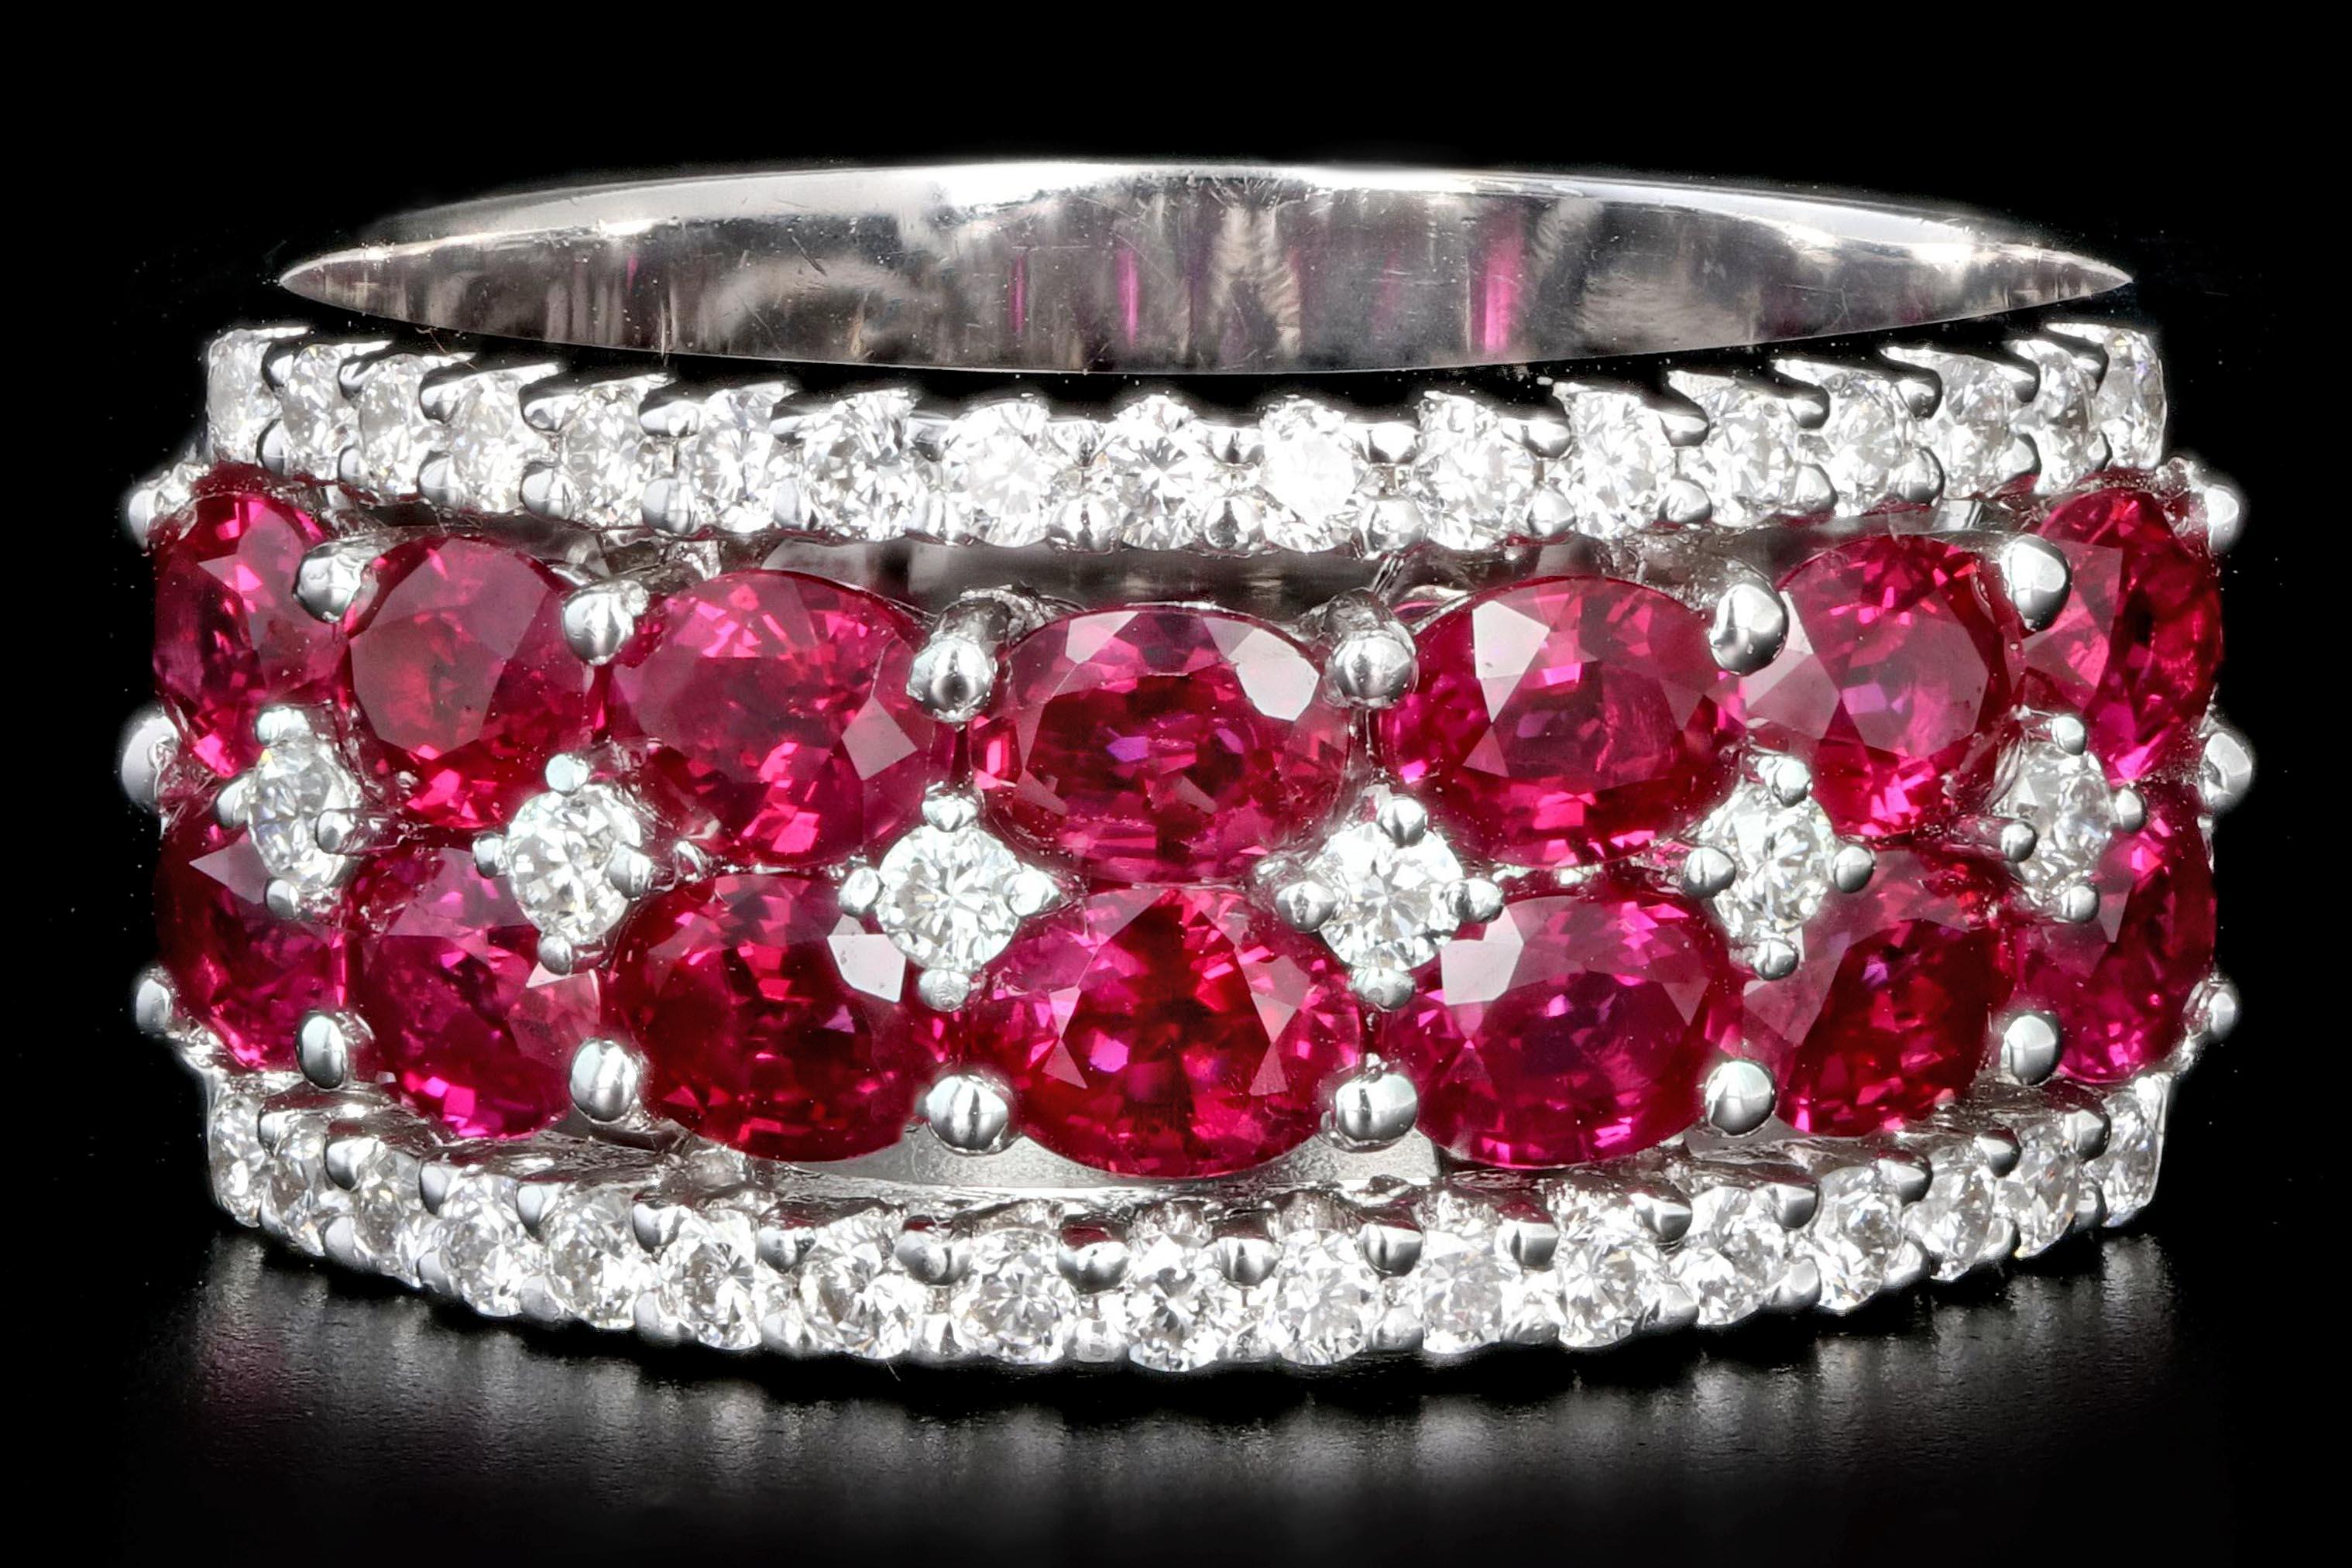 Era: Modern

Designer: Gregg Ruth

Composition: 18K White Gold

Primary Stone: Oval Cut Rubies

Primary Stone Total Carat Weight: 2.99 Carats

Accent Stone: Round Diamonds 

Accent Stone Total Carat Weight: .55 Carats

Color/ Clarity: G/H